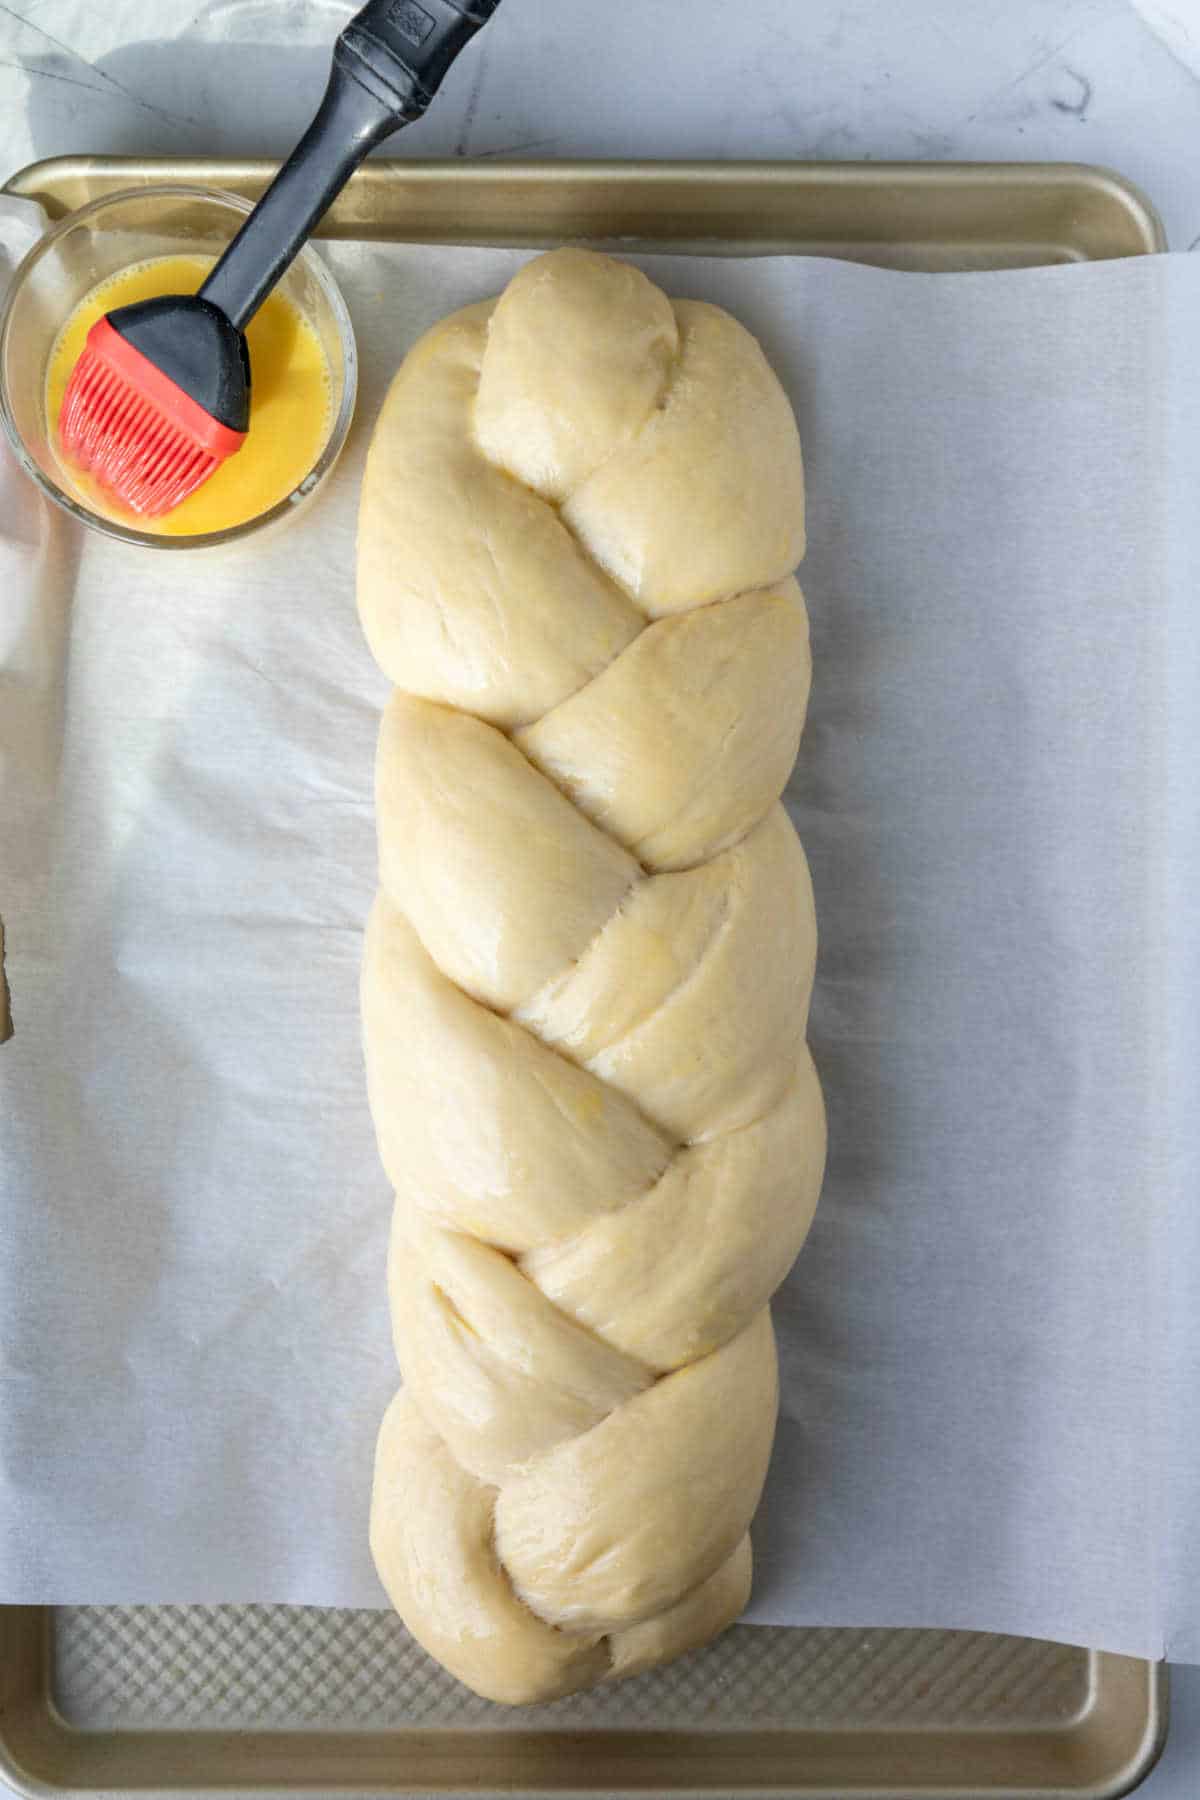 An unbaked loaf of braided bread with egg wash.